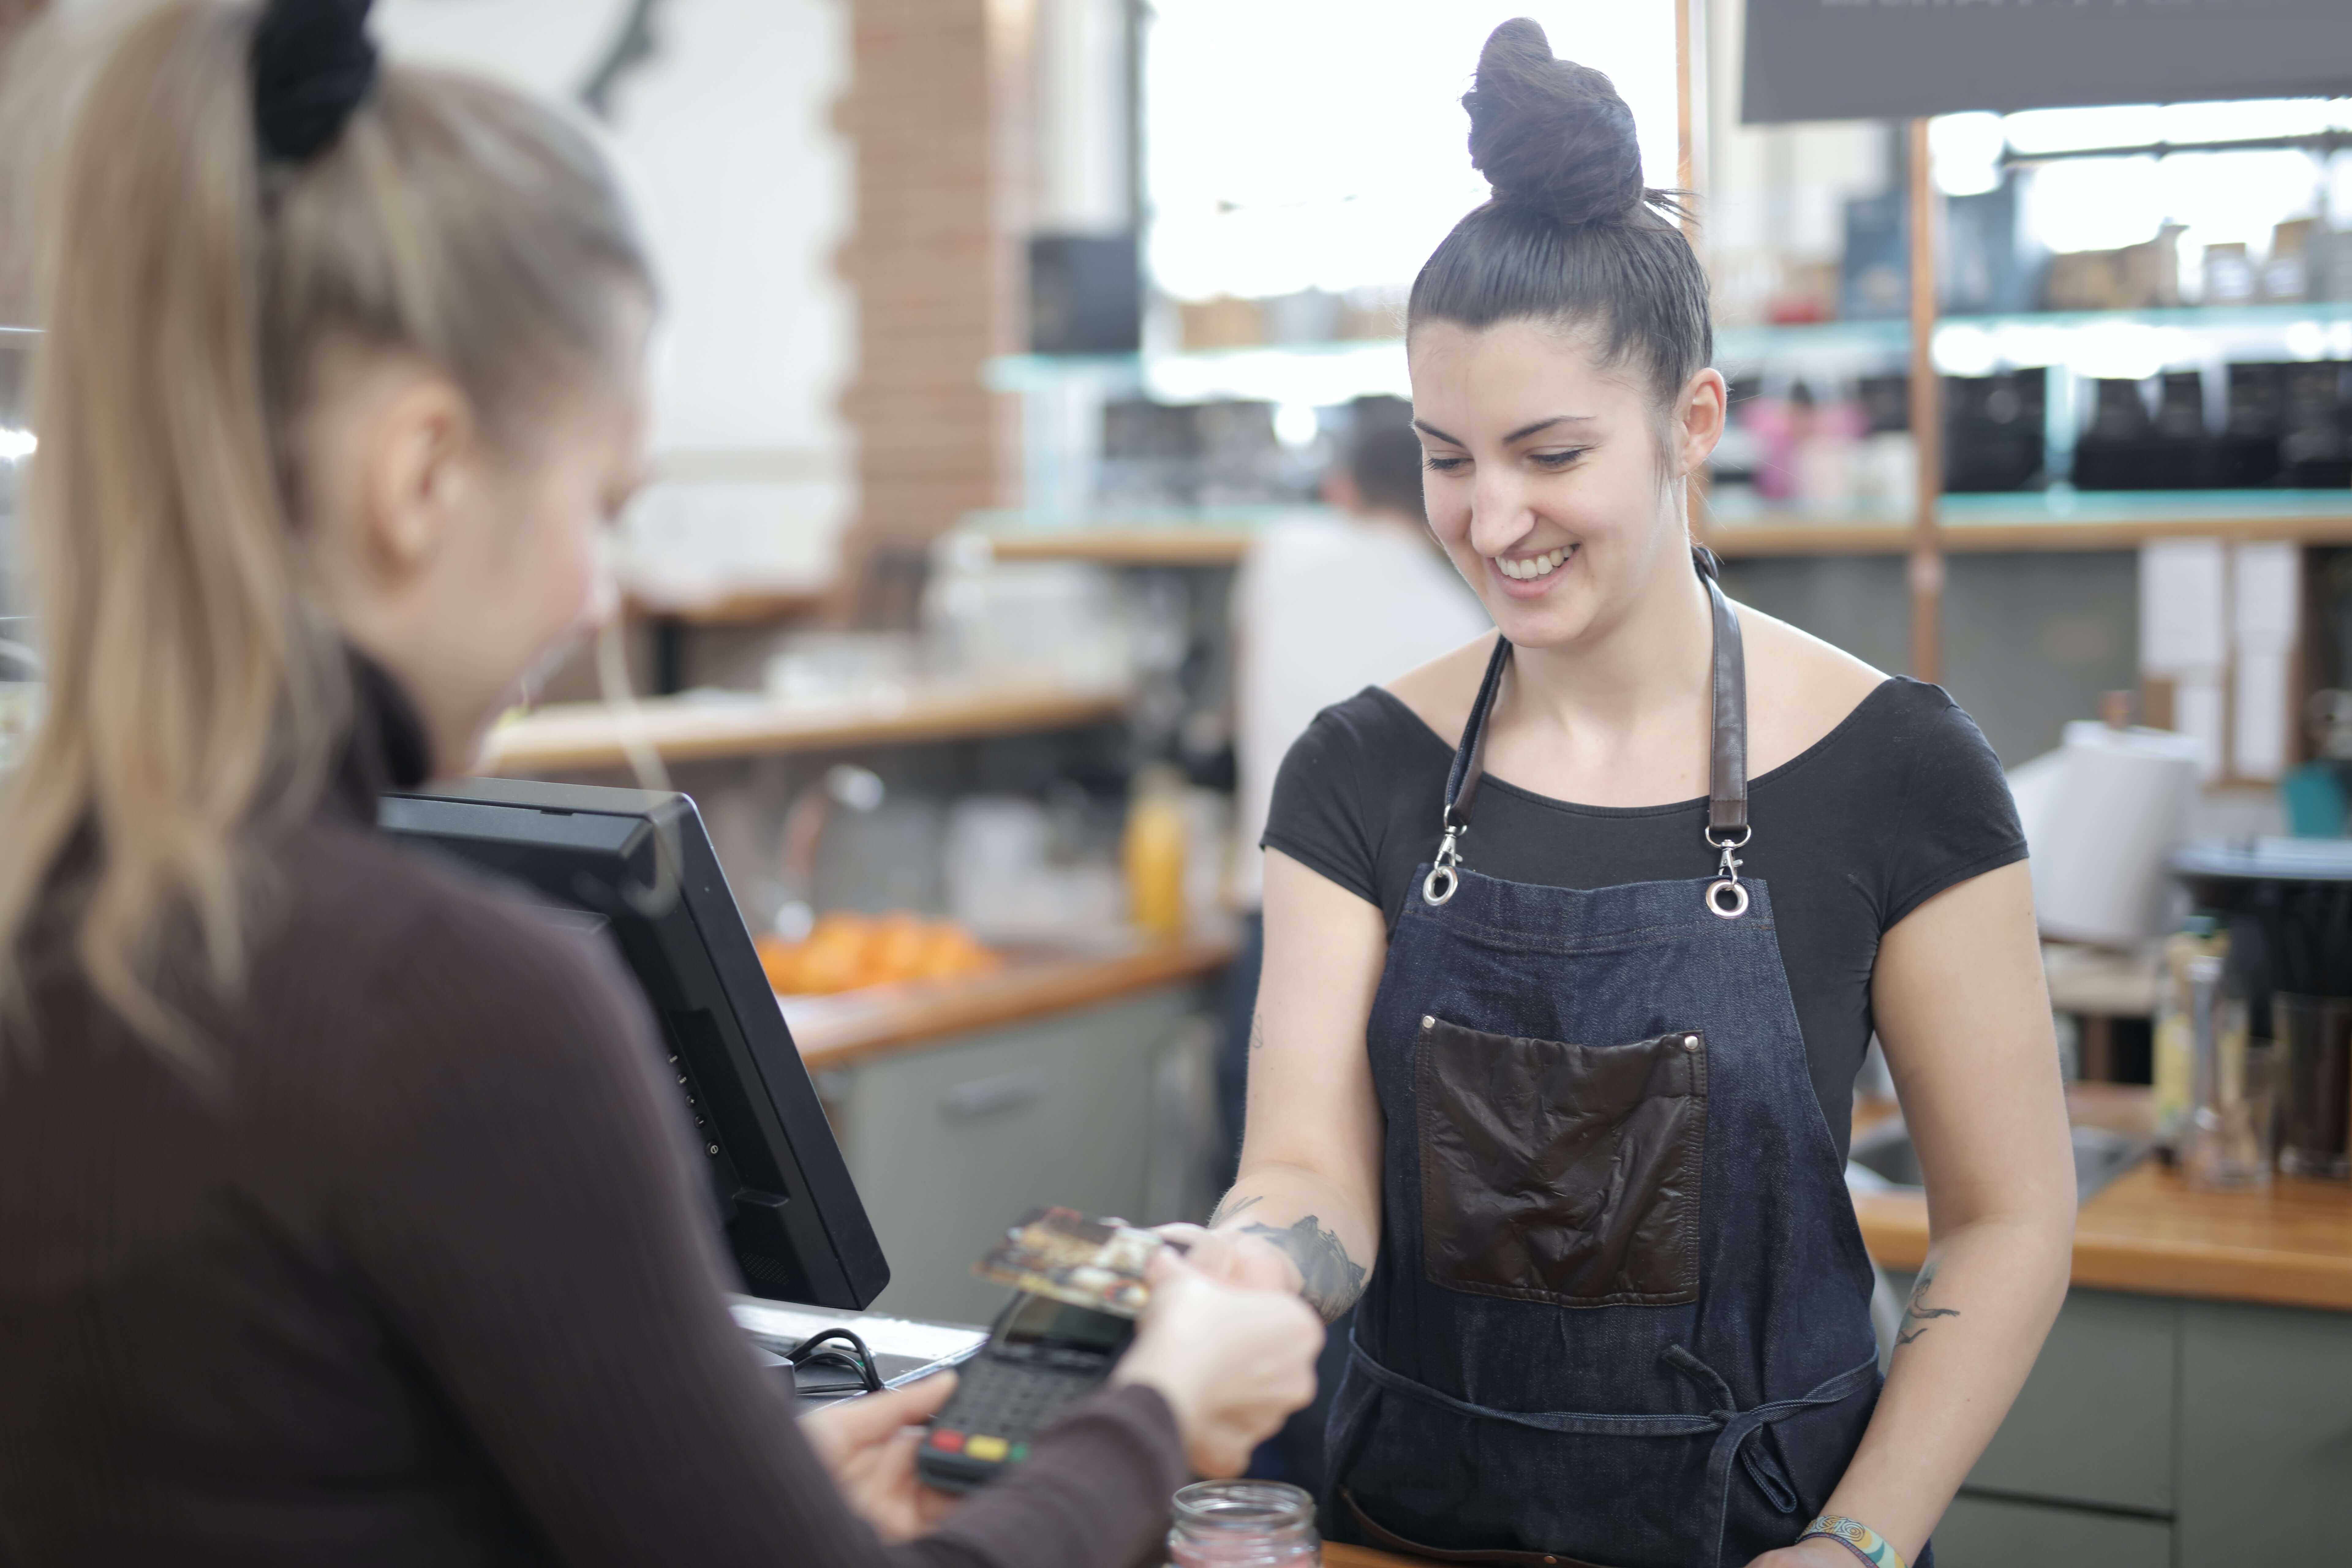 From retail to RevOps: Why your first job experience matters